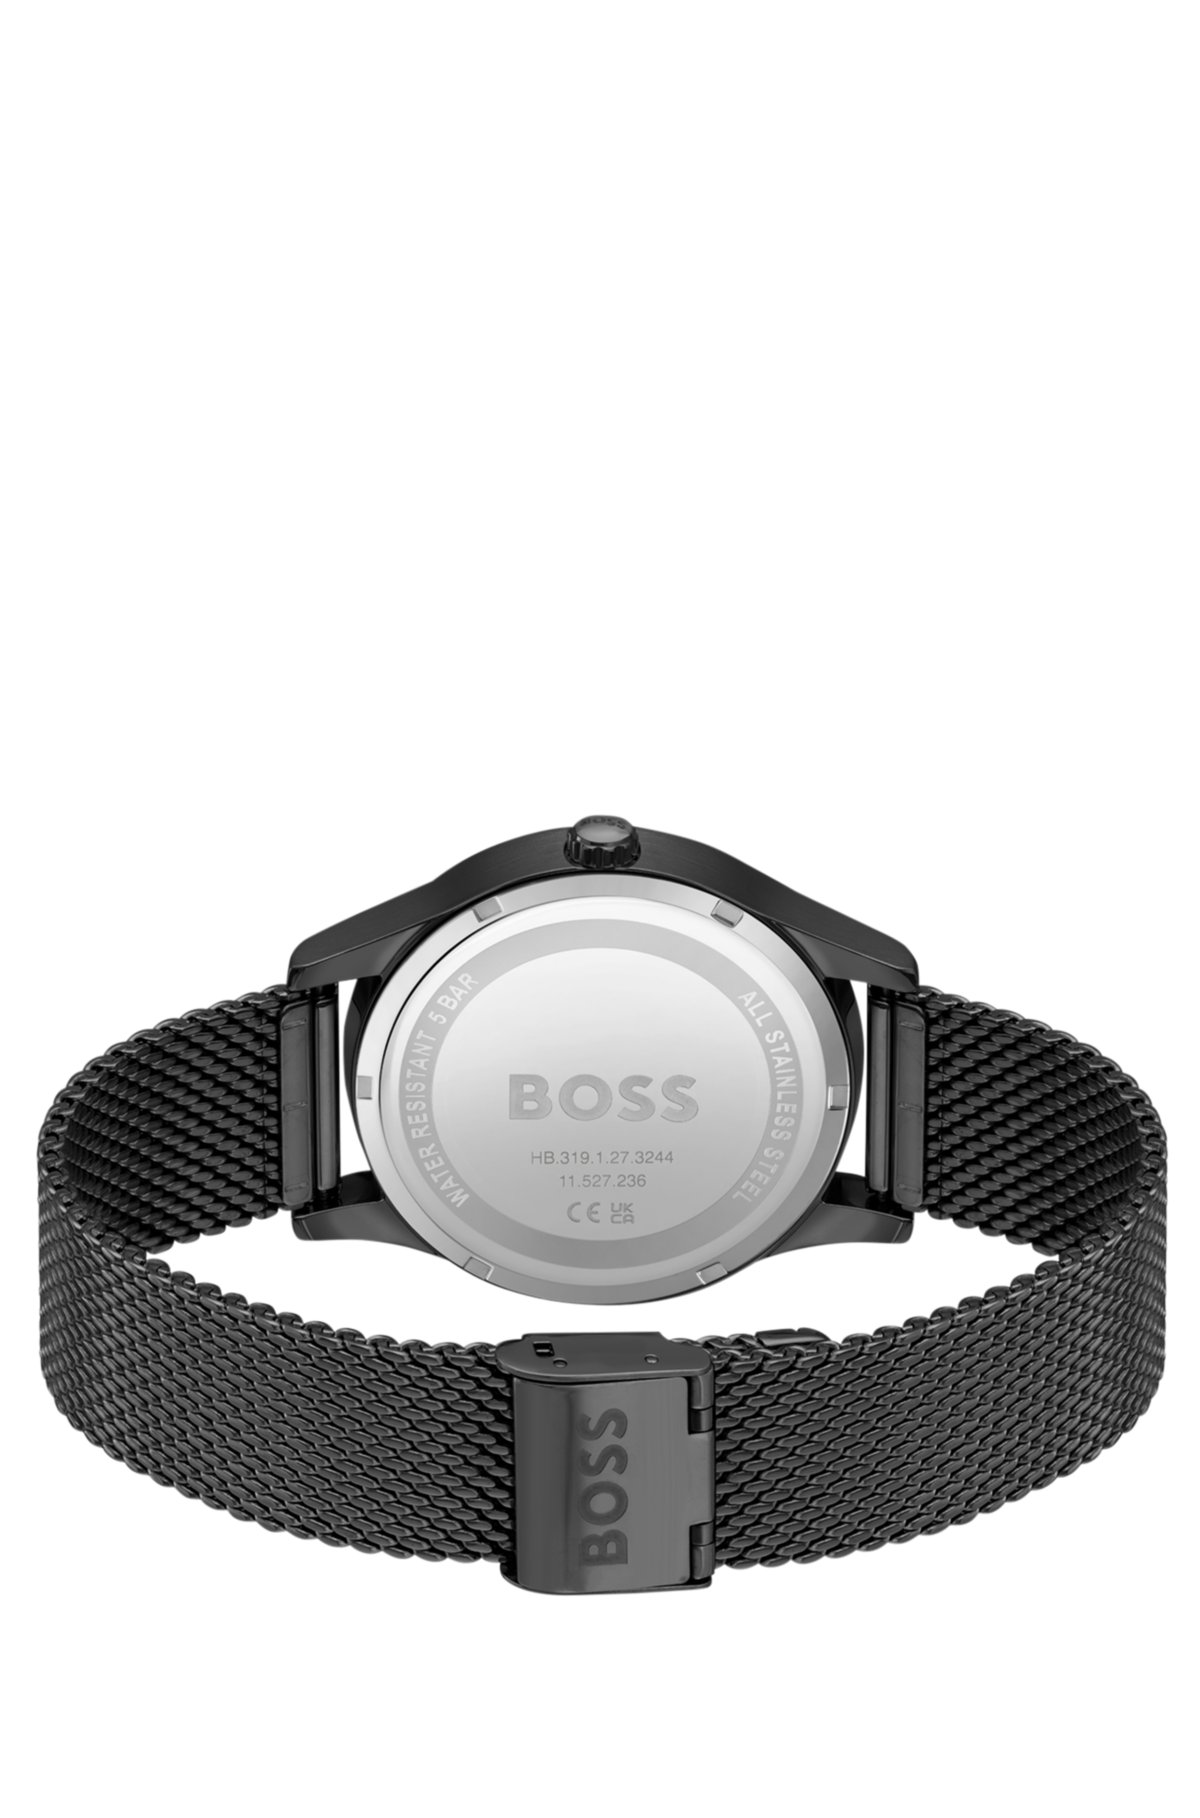 BOSS - Black-plated watch with mesh bracelet